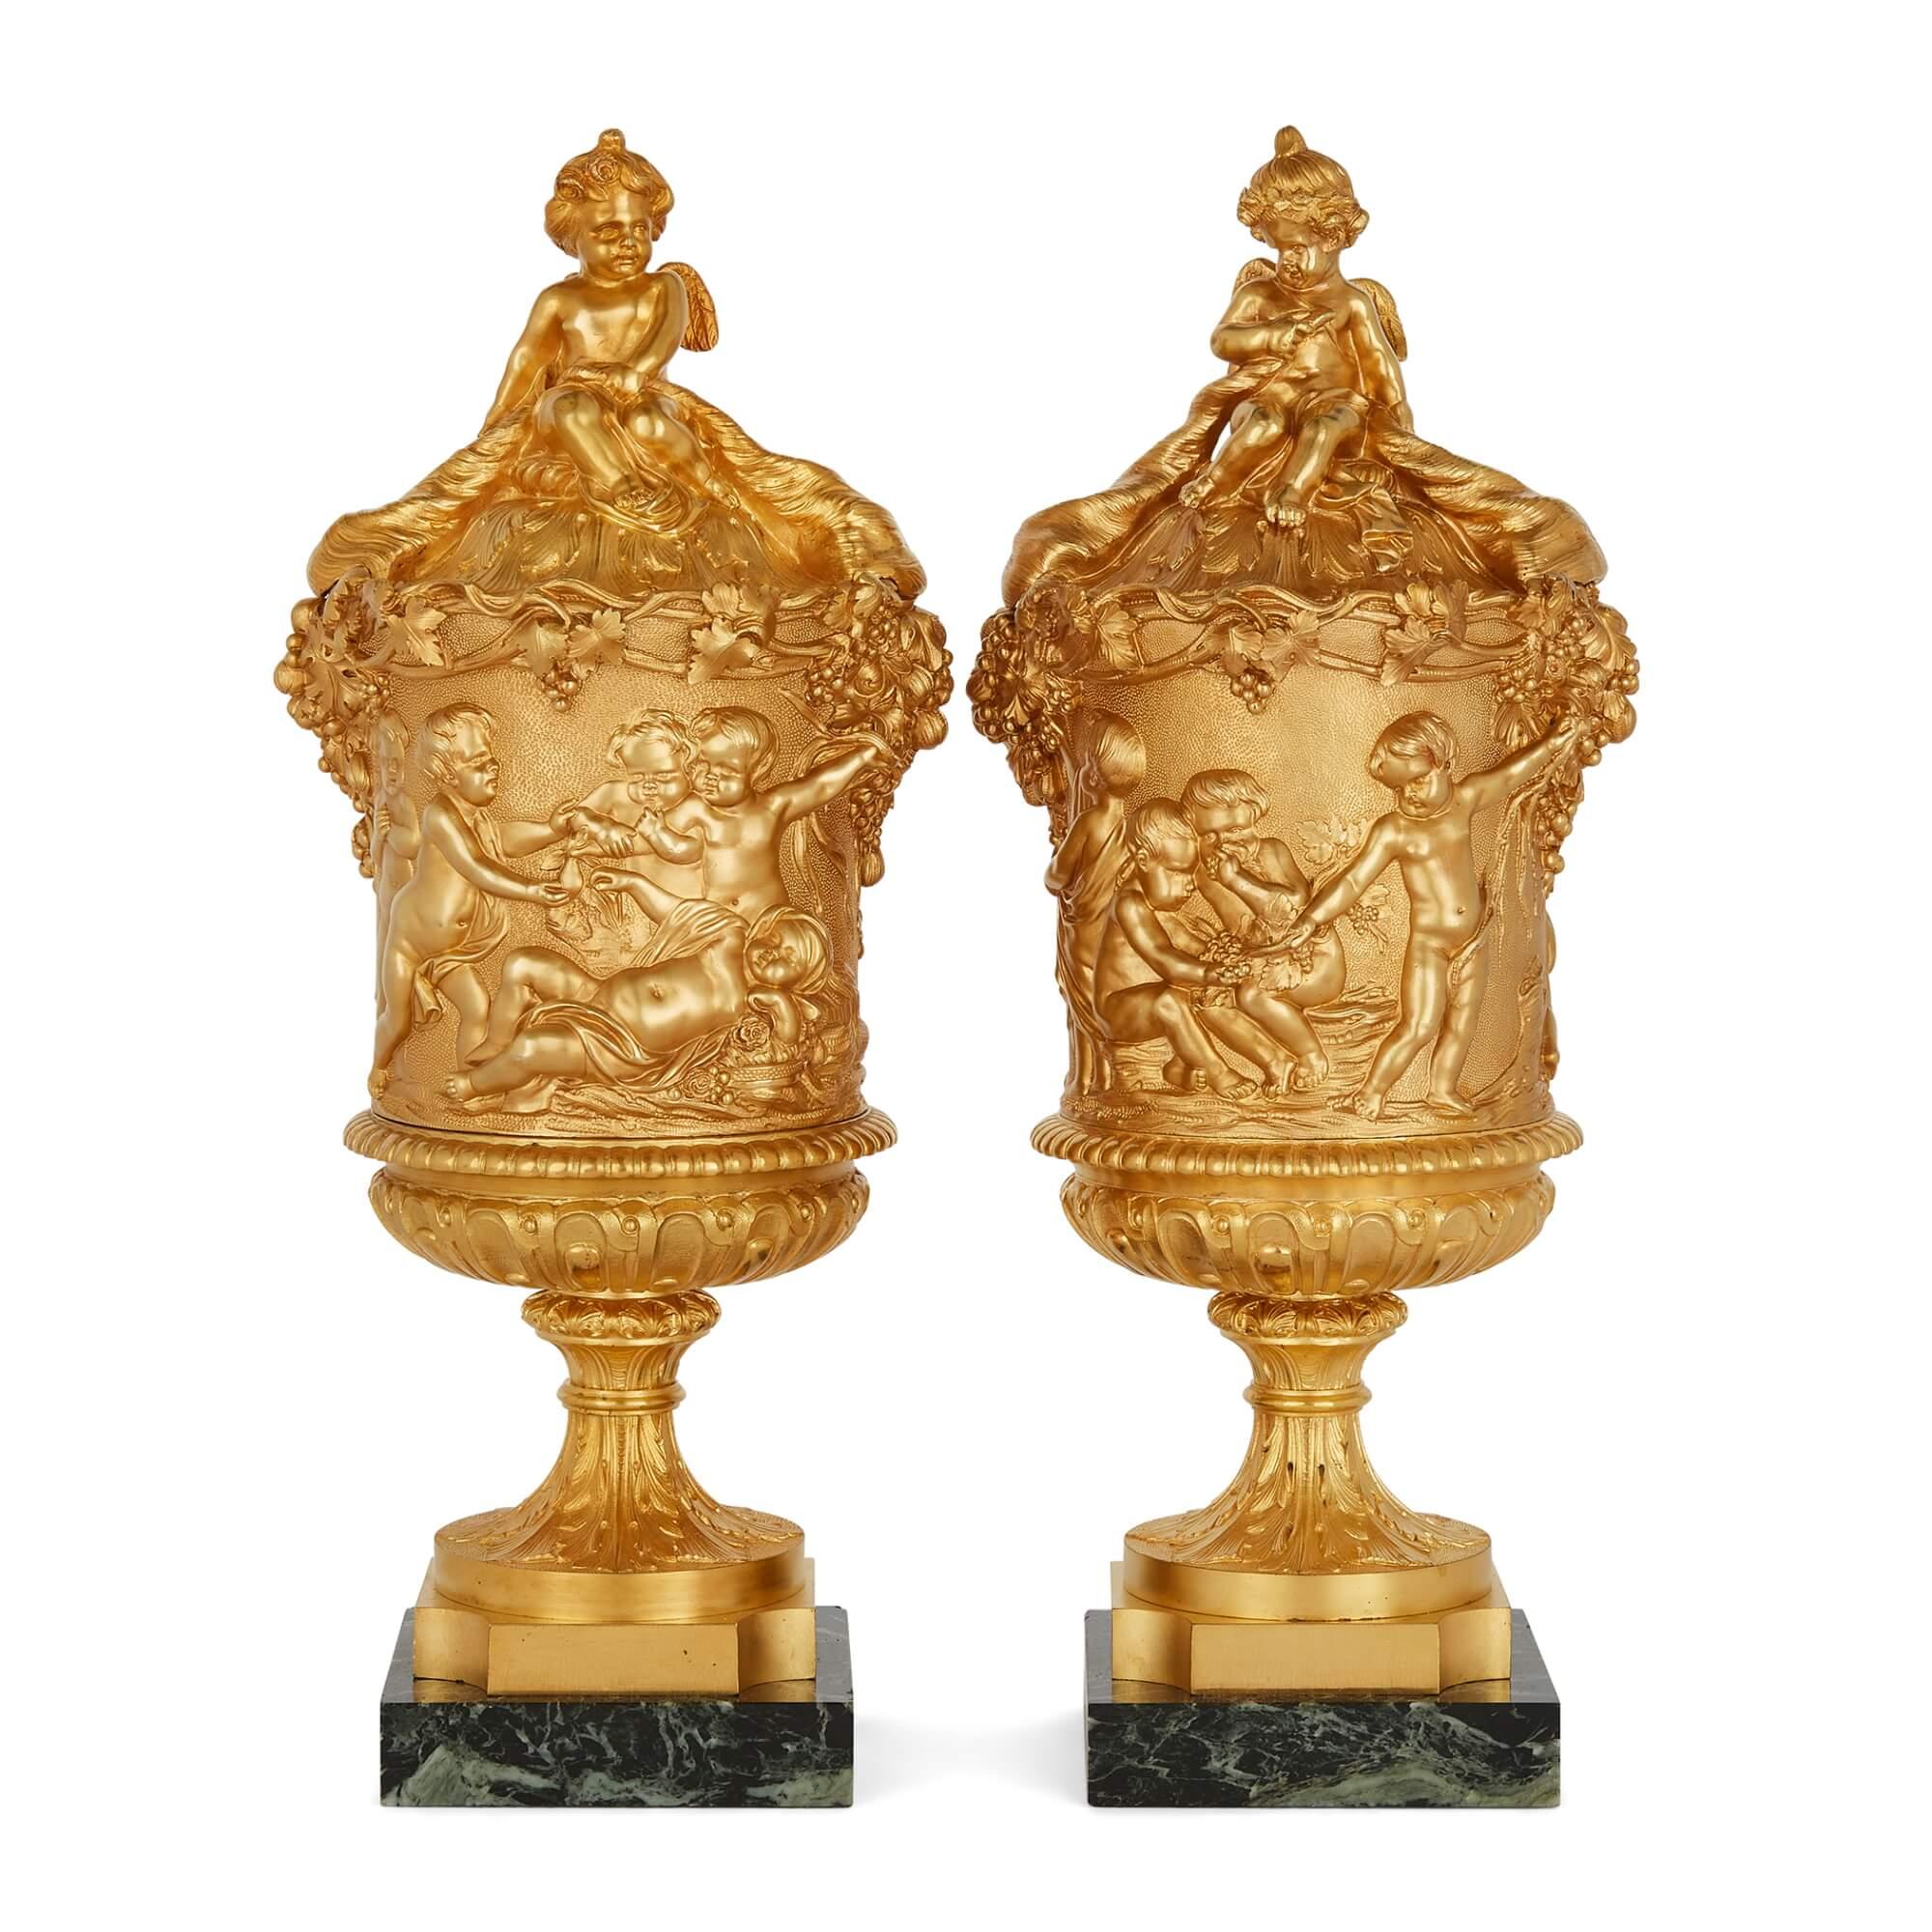 A pair of Louis XVI style ormolu lidded urns with designs in the style of Clodion
French, 19th century
Measures: Height: 44cm, width 18cm, depth 15cm. 

Crafted in the 19th century and heavily in debted to Clodion, the nineteenth century French